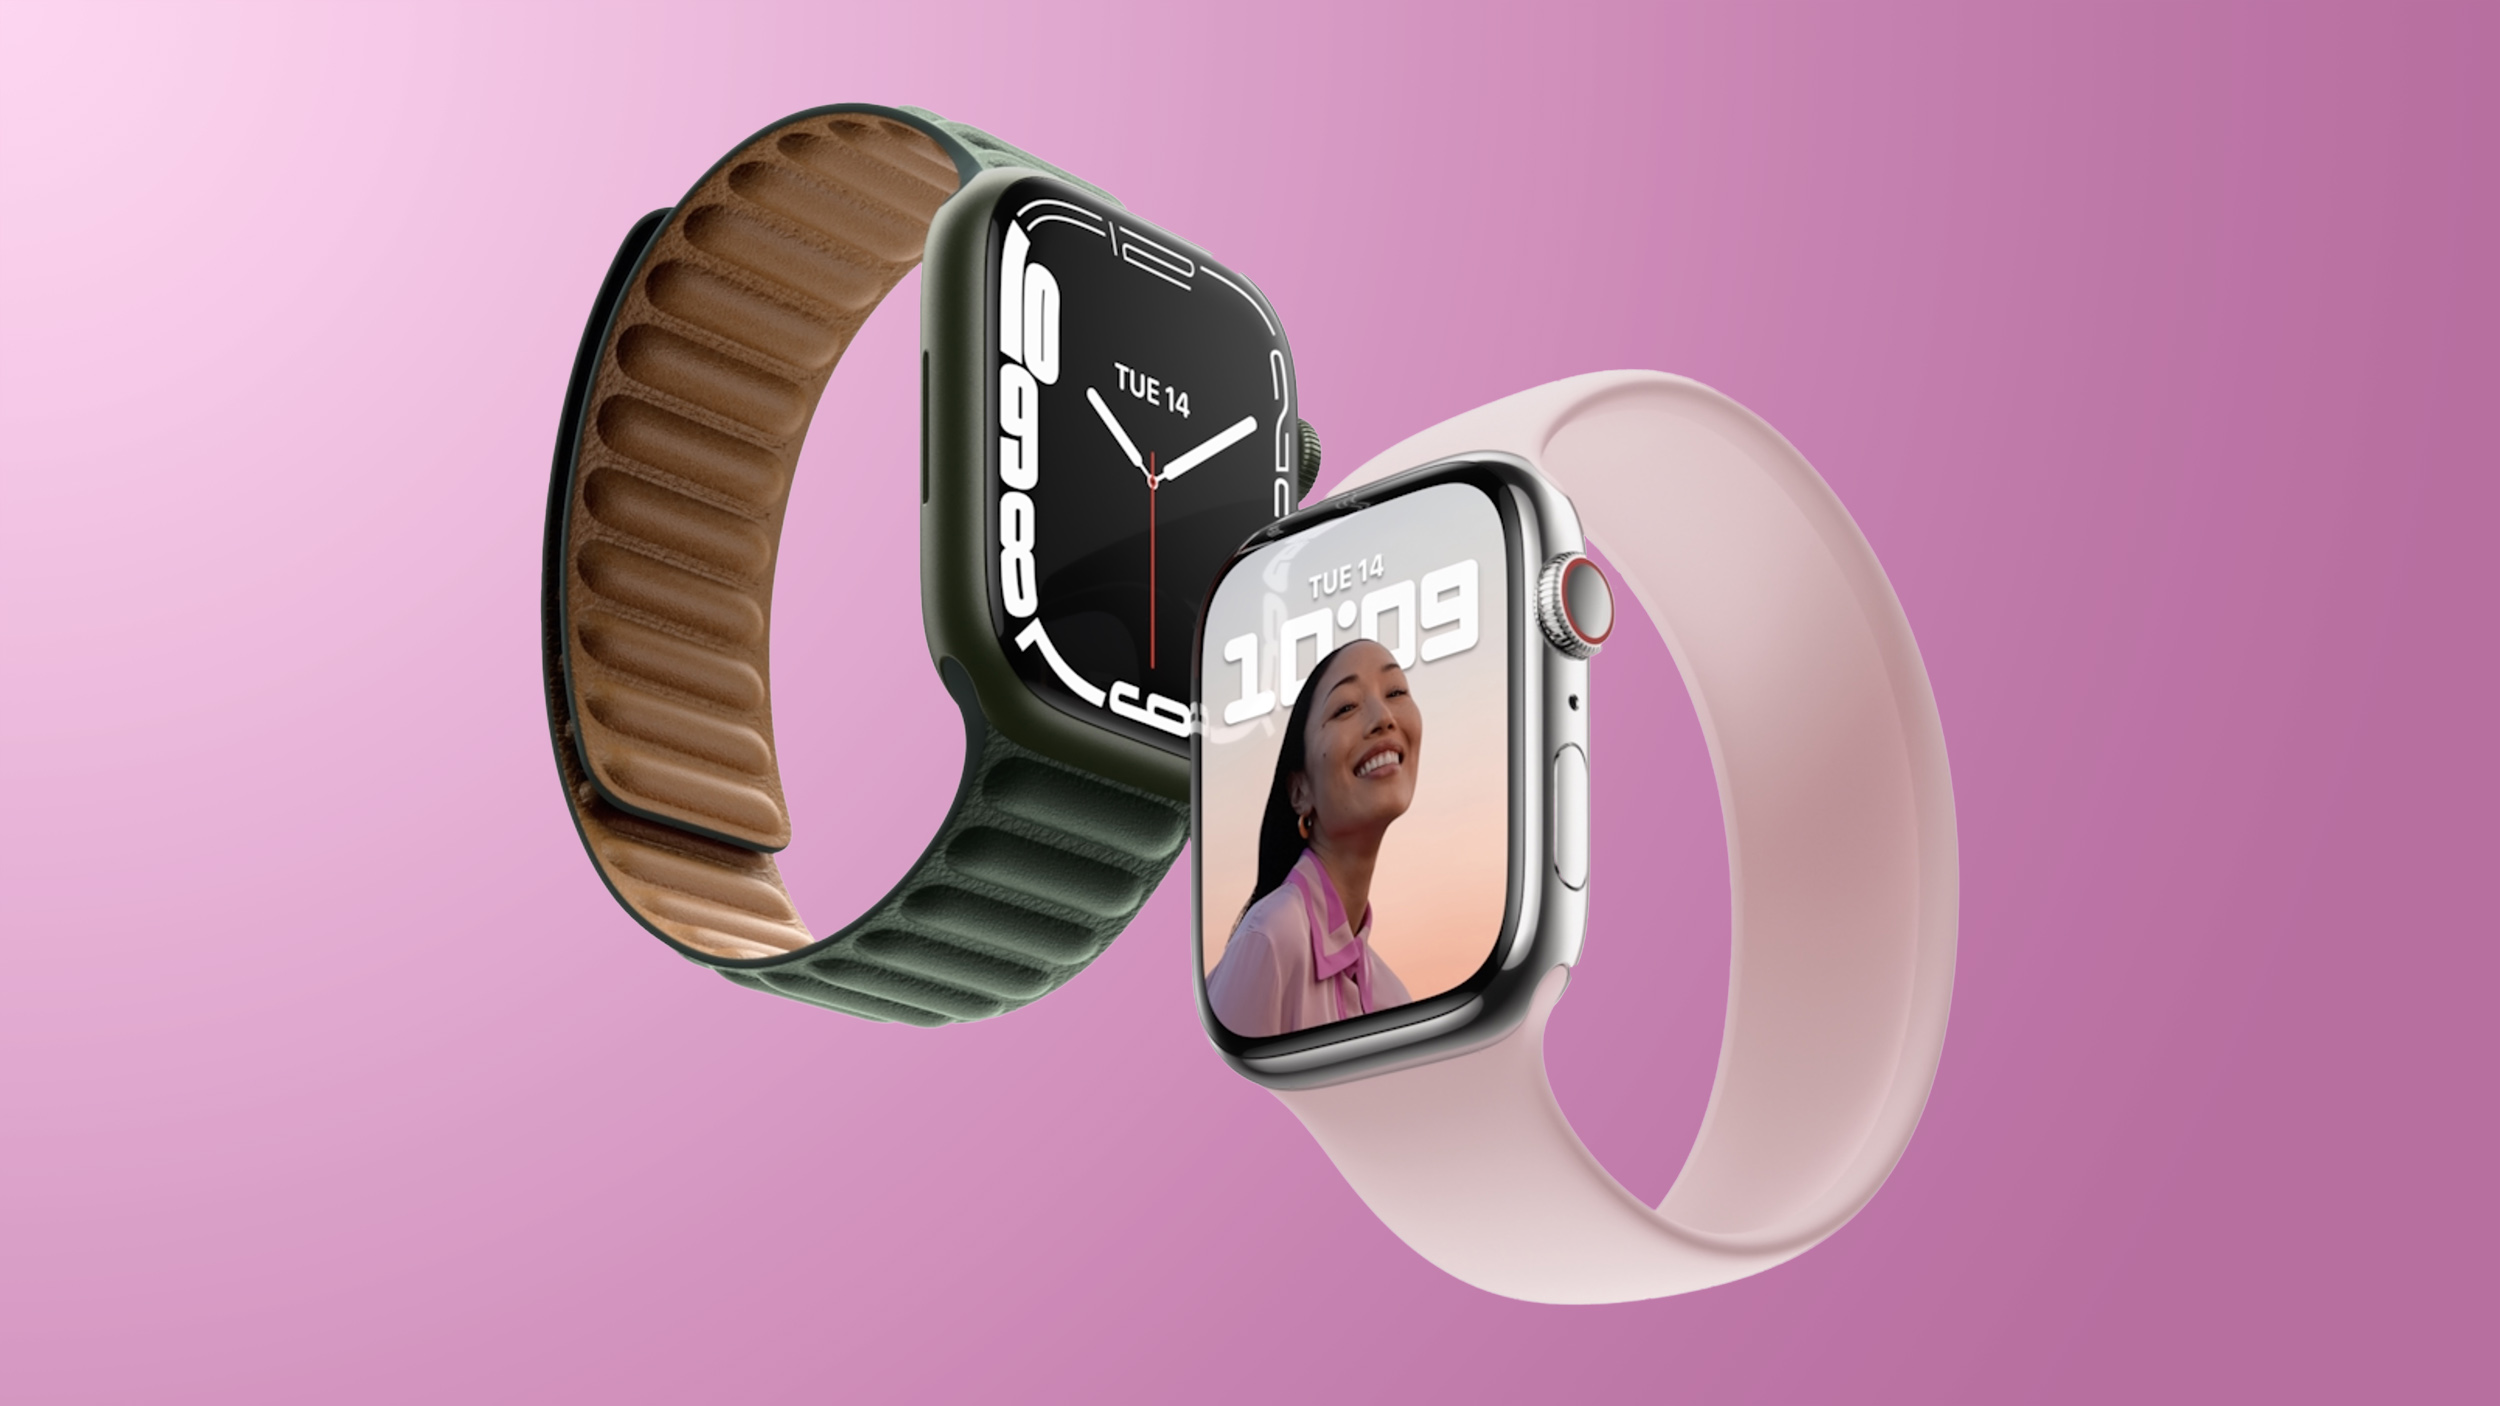 Rumored Apple Watch Lineup For 2022 To Include Three New Models Laptrinhx News